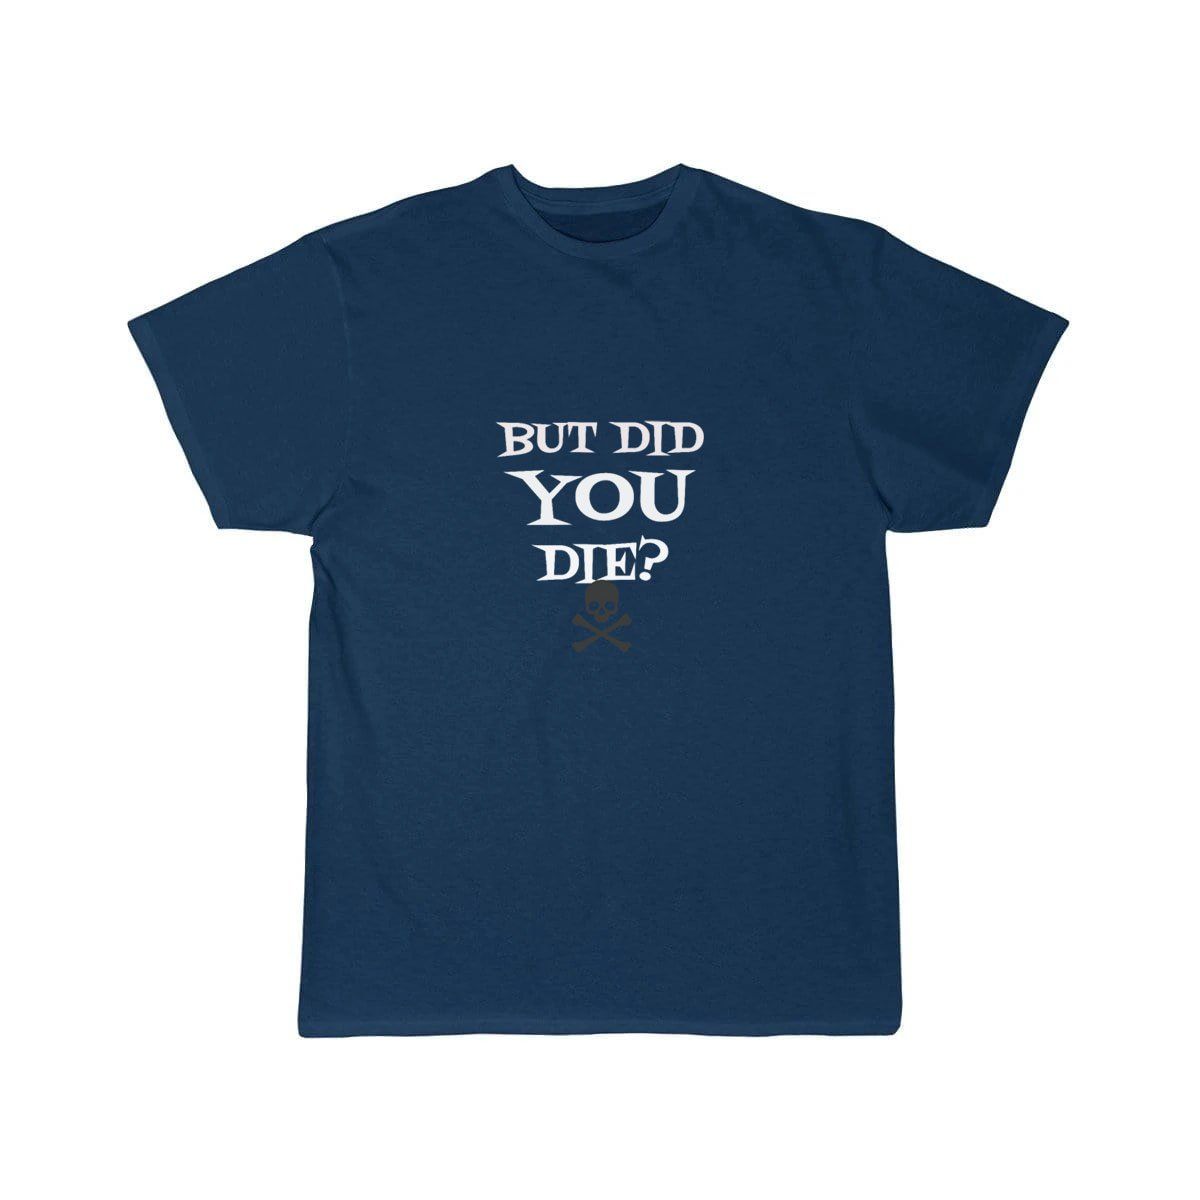 But did you die T-SHIRT THE AV8R